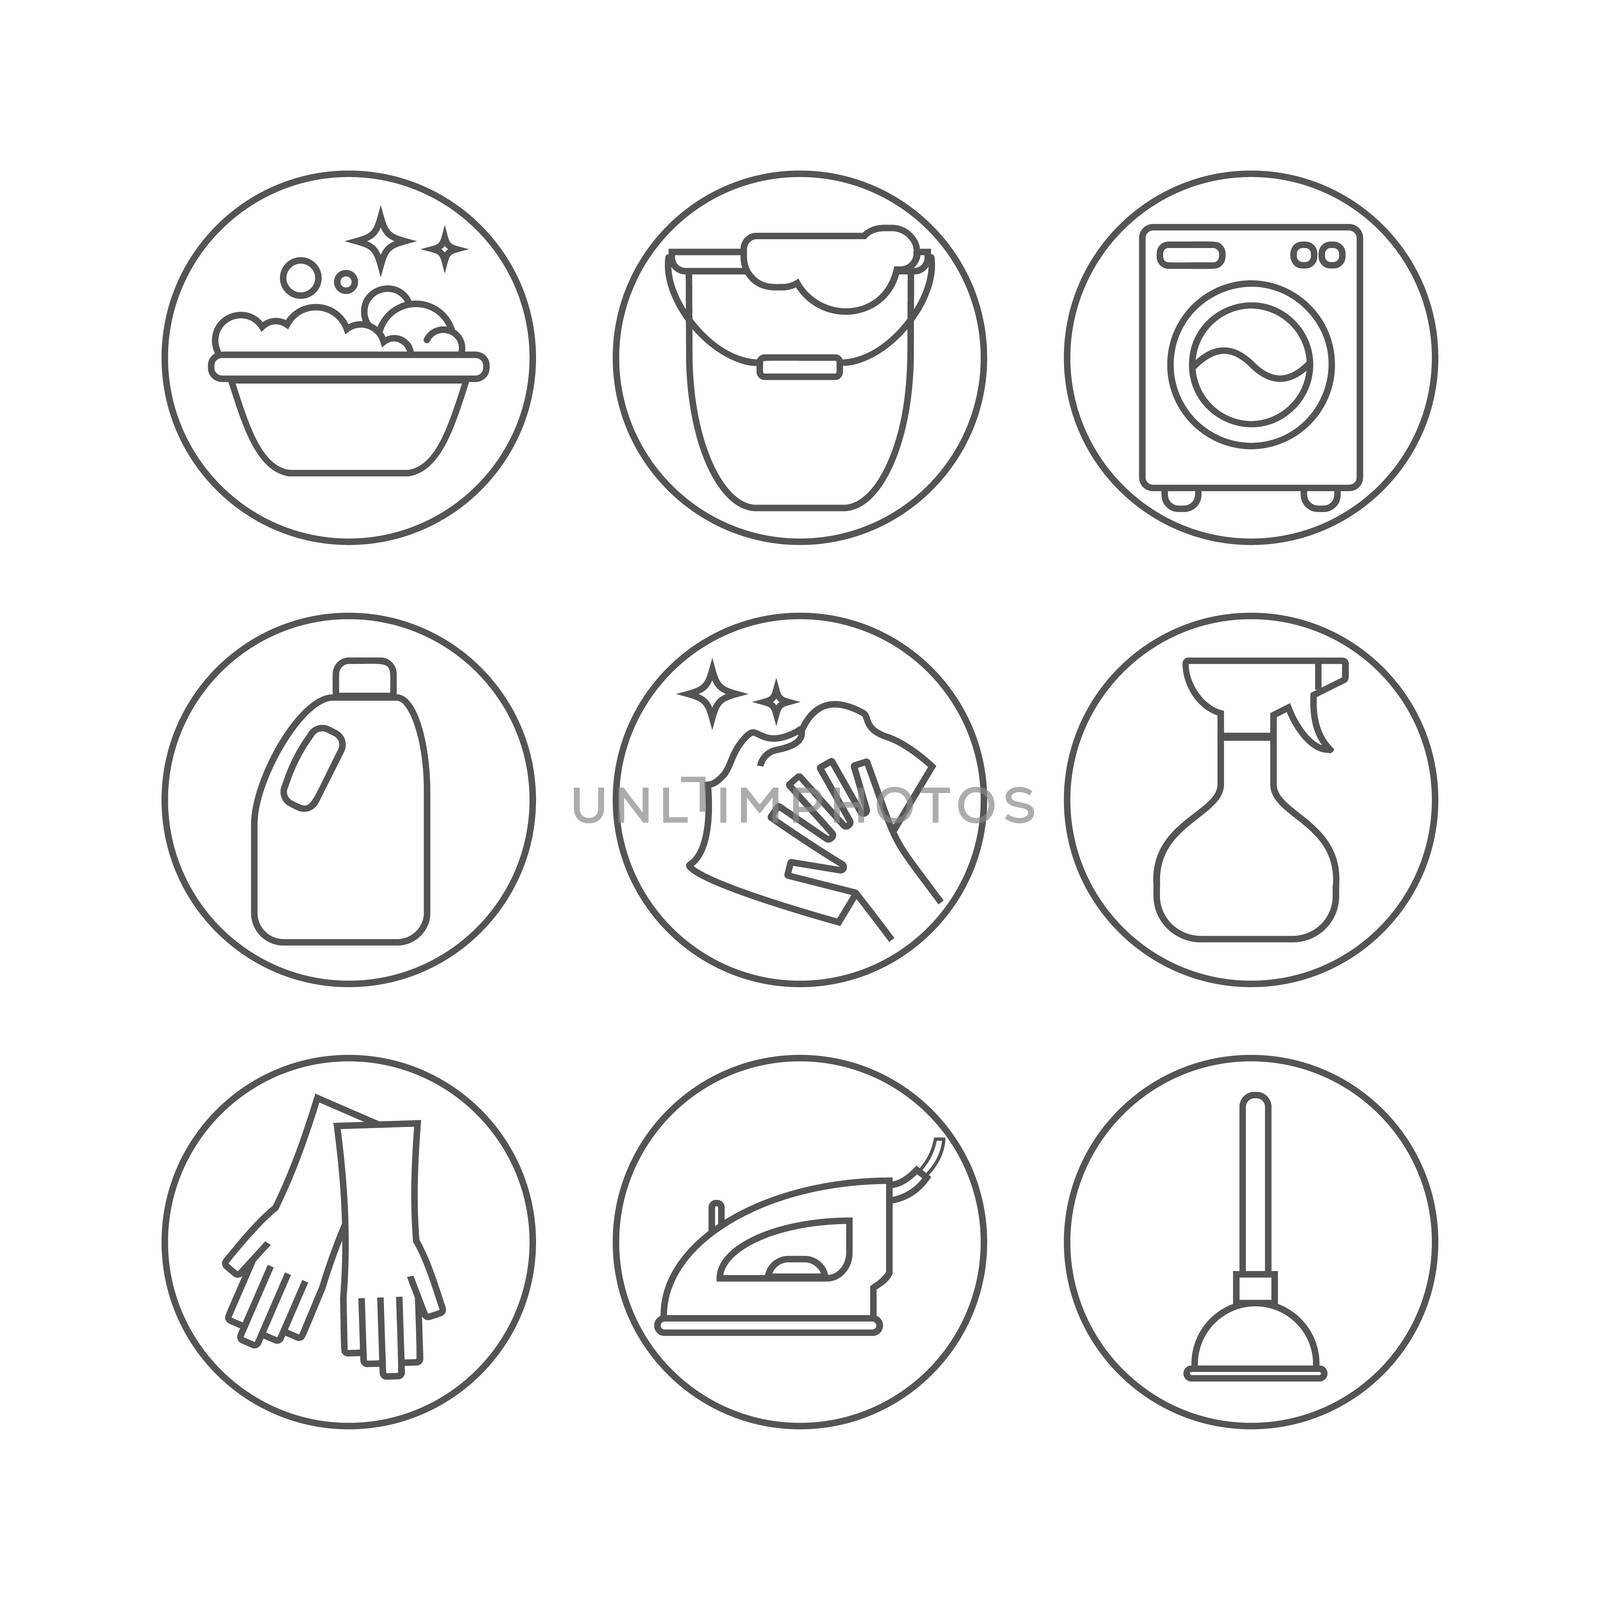 Cleaning, wash line icons. Washing machine, sponge, mop, iron, vacuum cleaner, shovel and other clining icon. Order in the house thin linear signs for cleaning service. by Elena_Garder